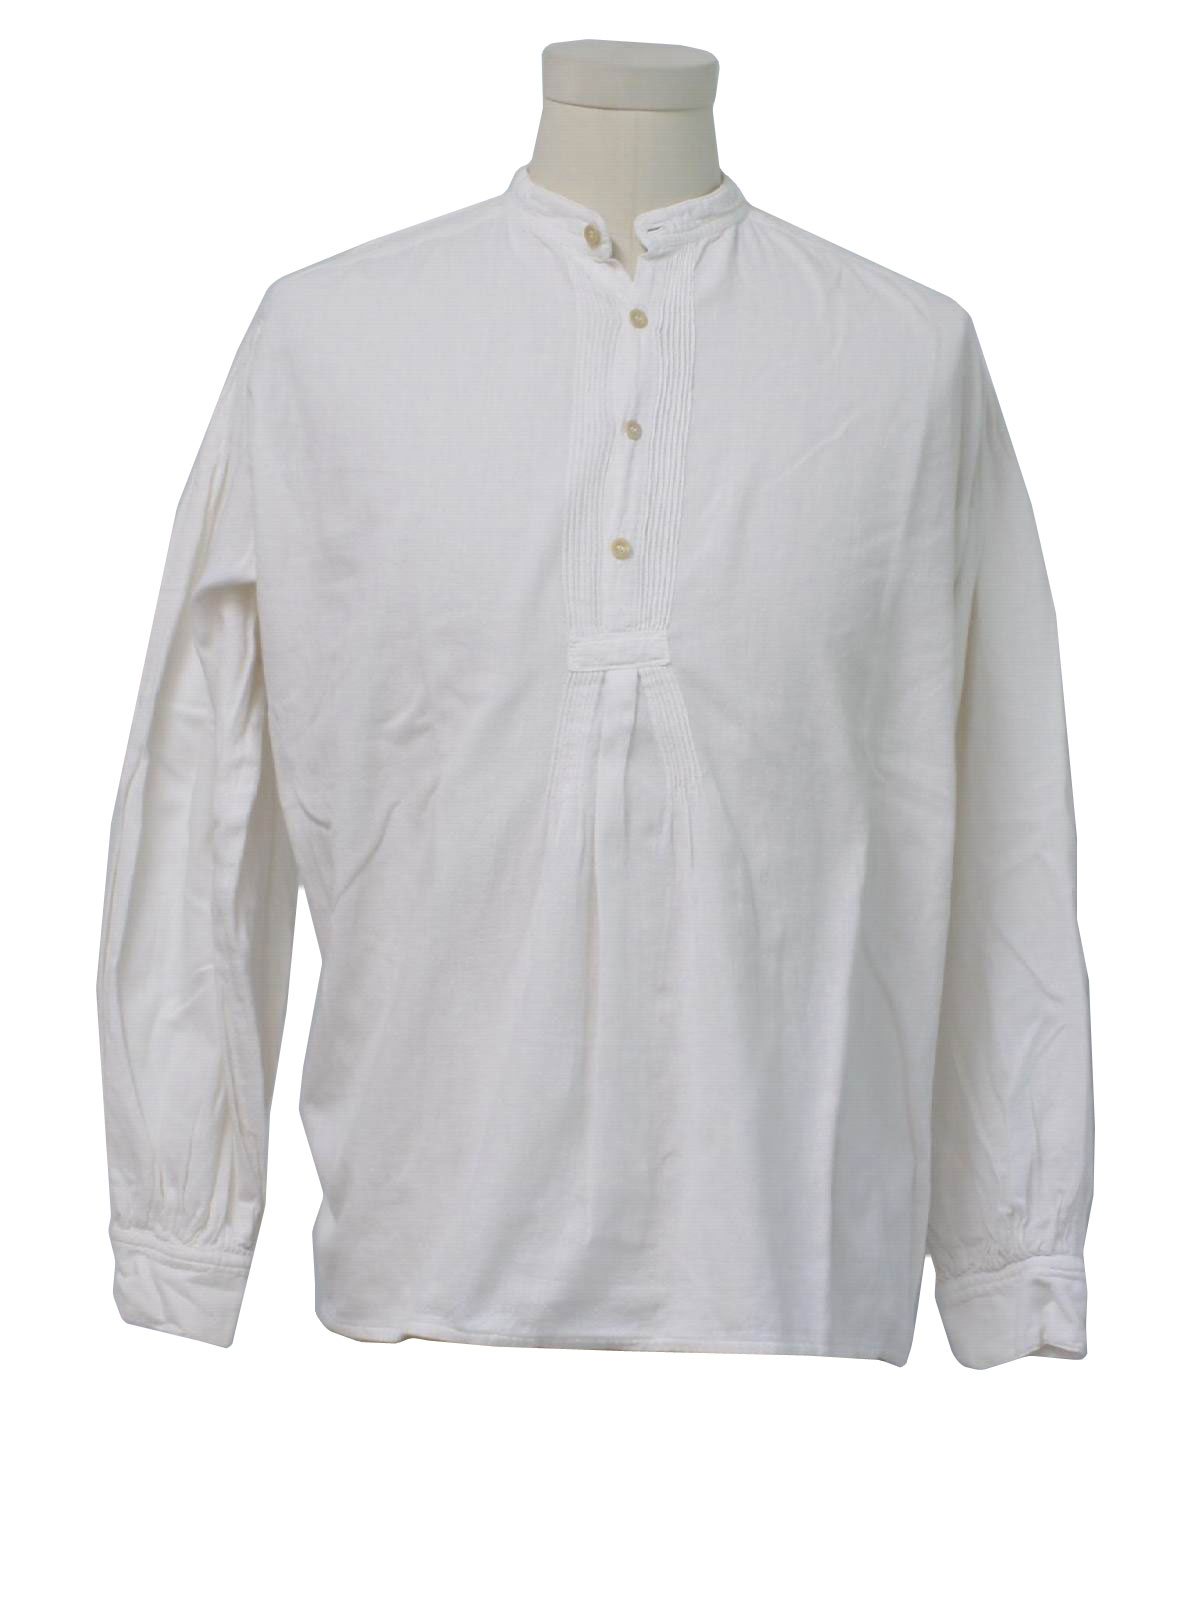 Western Shirt: 90s -The J Peterman Company- Mens Late 1800s style white ...